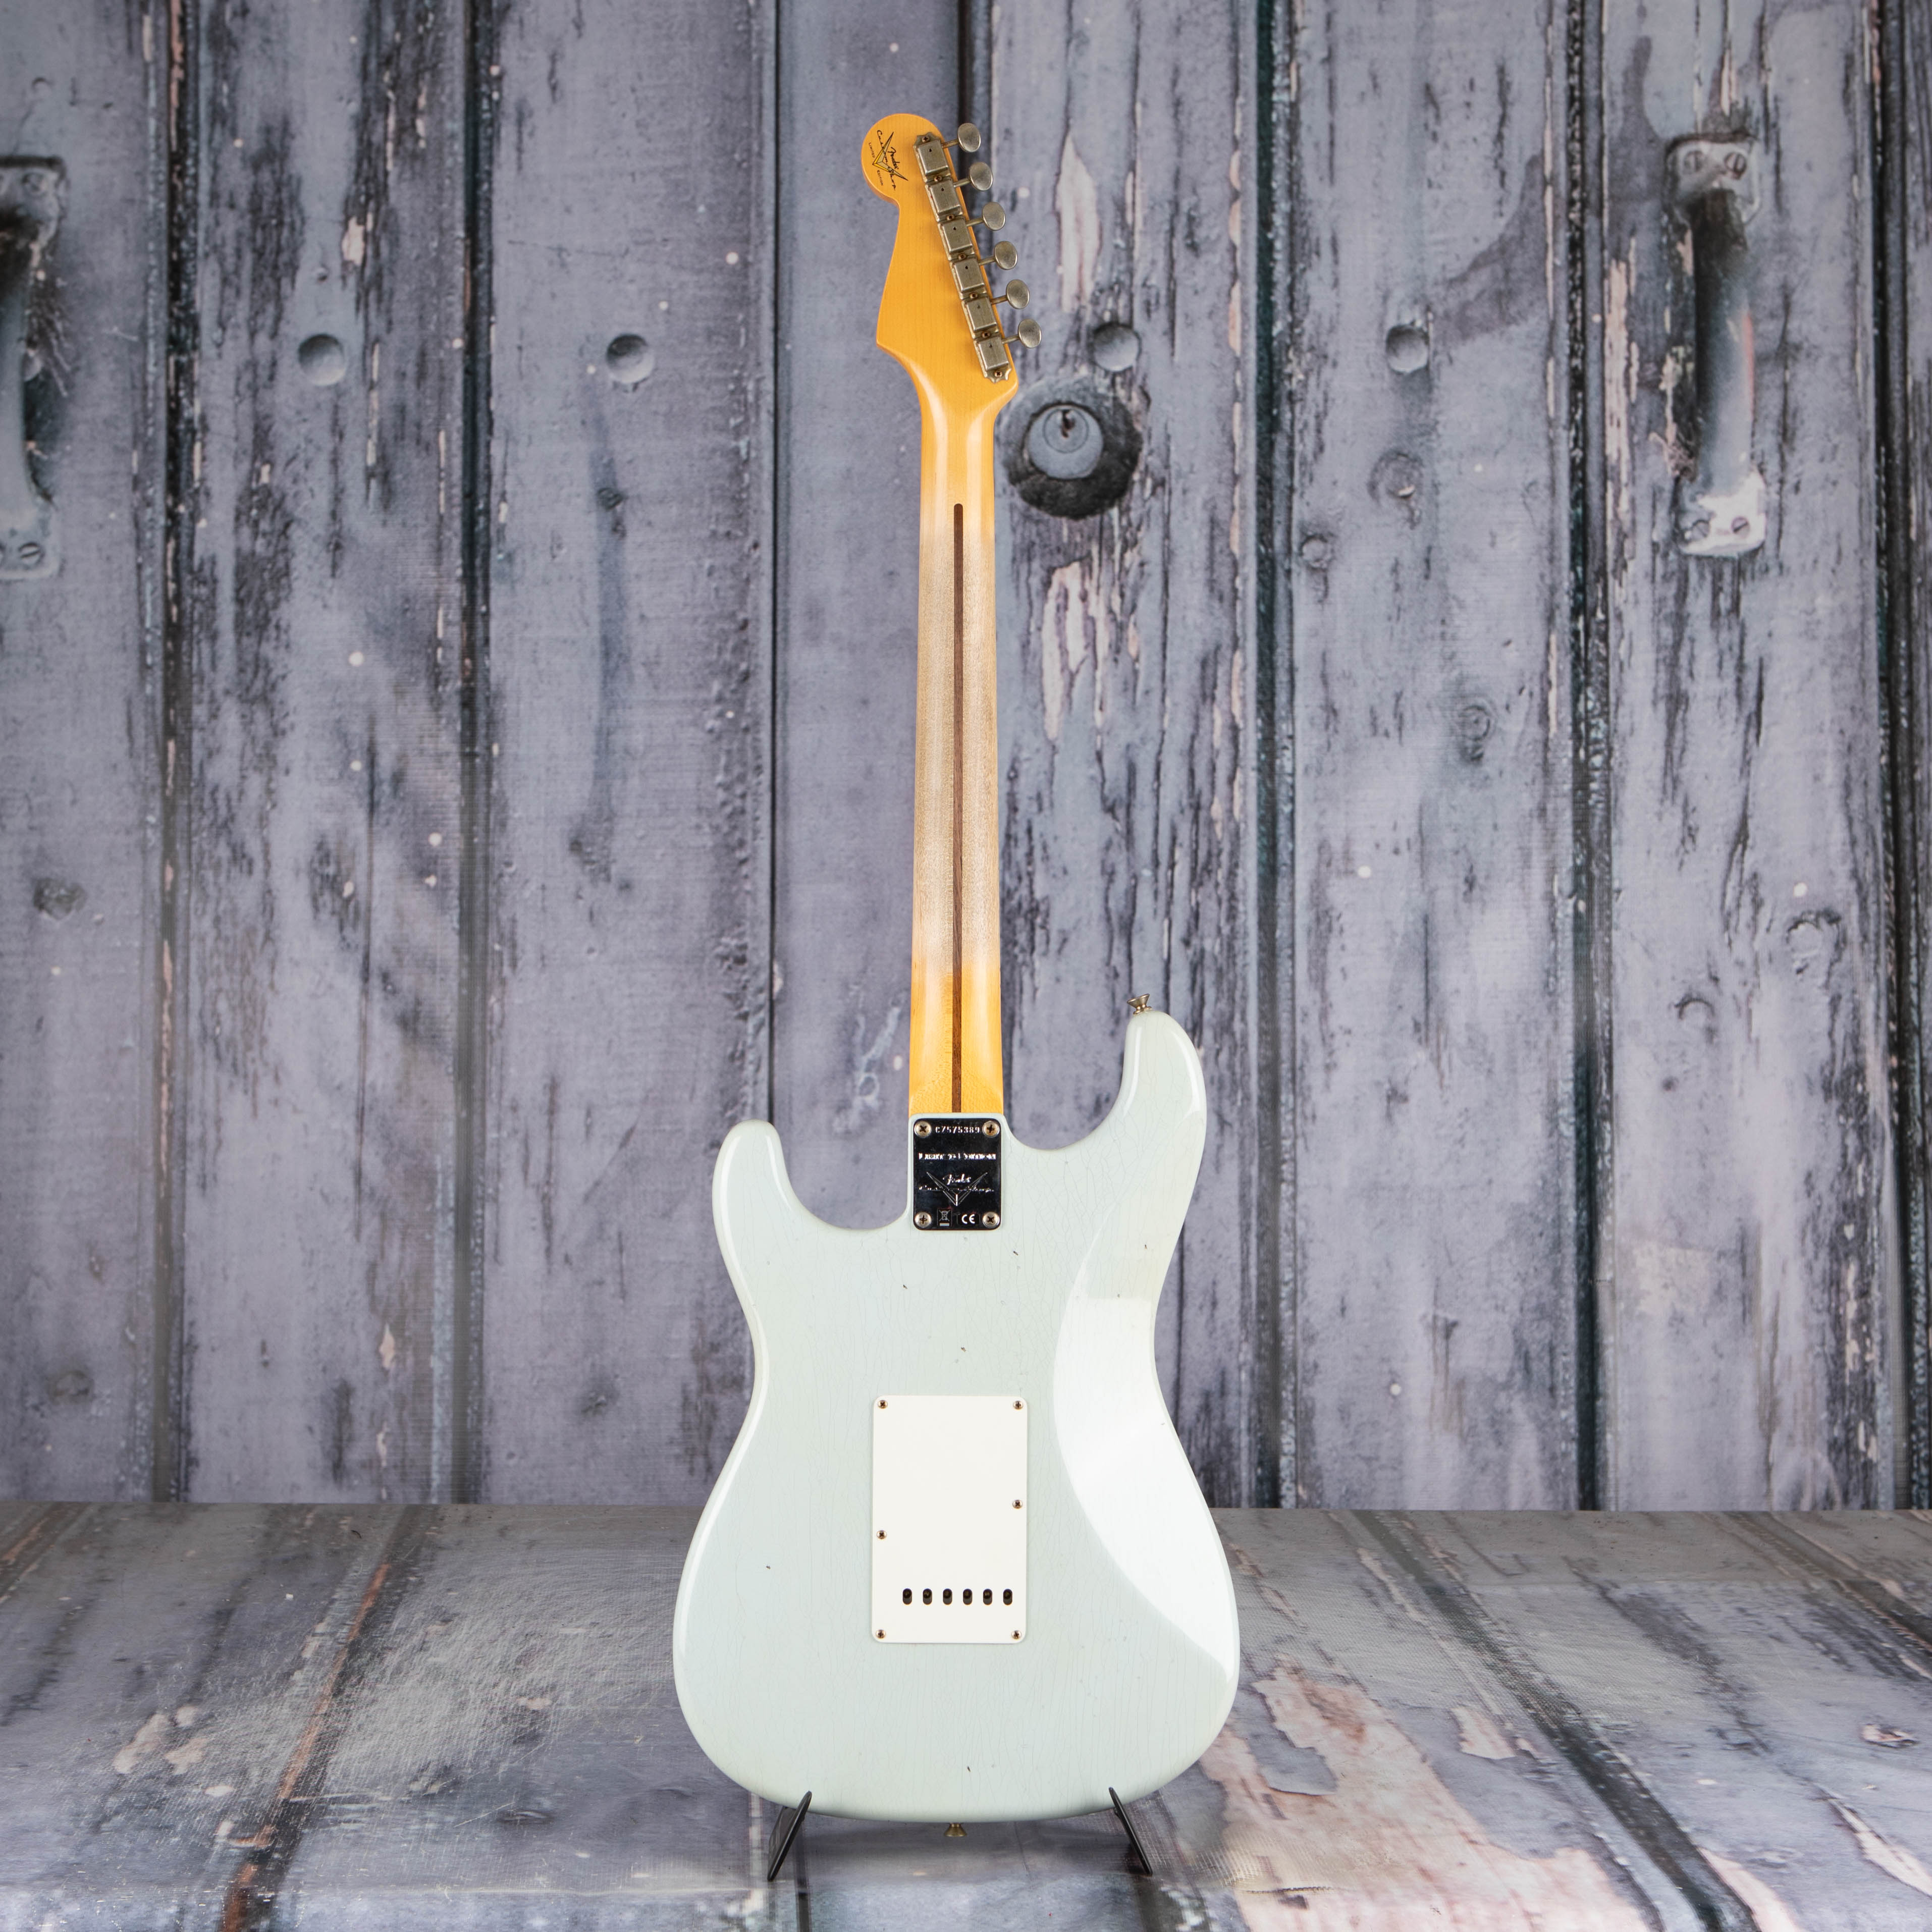 Fender Custom Shop Limited Edition '57 Stratocaster Journeyman Relic Electric Guitar, Aged Sonic Blue, back